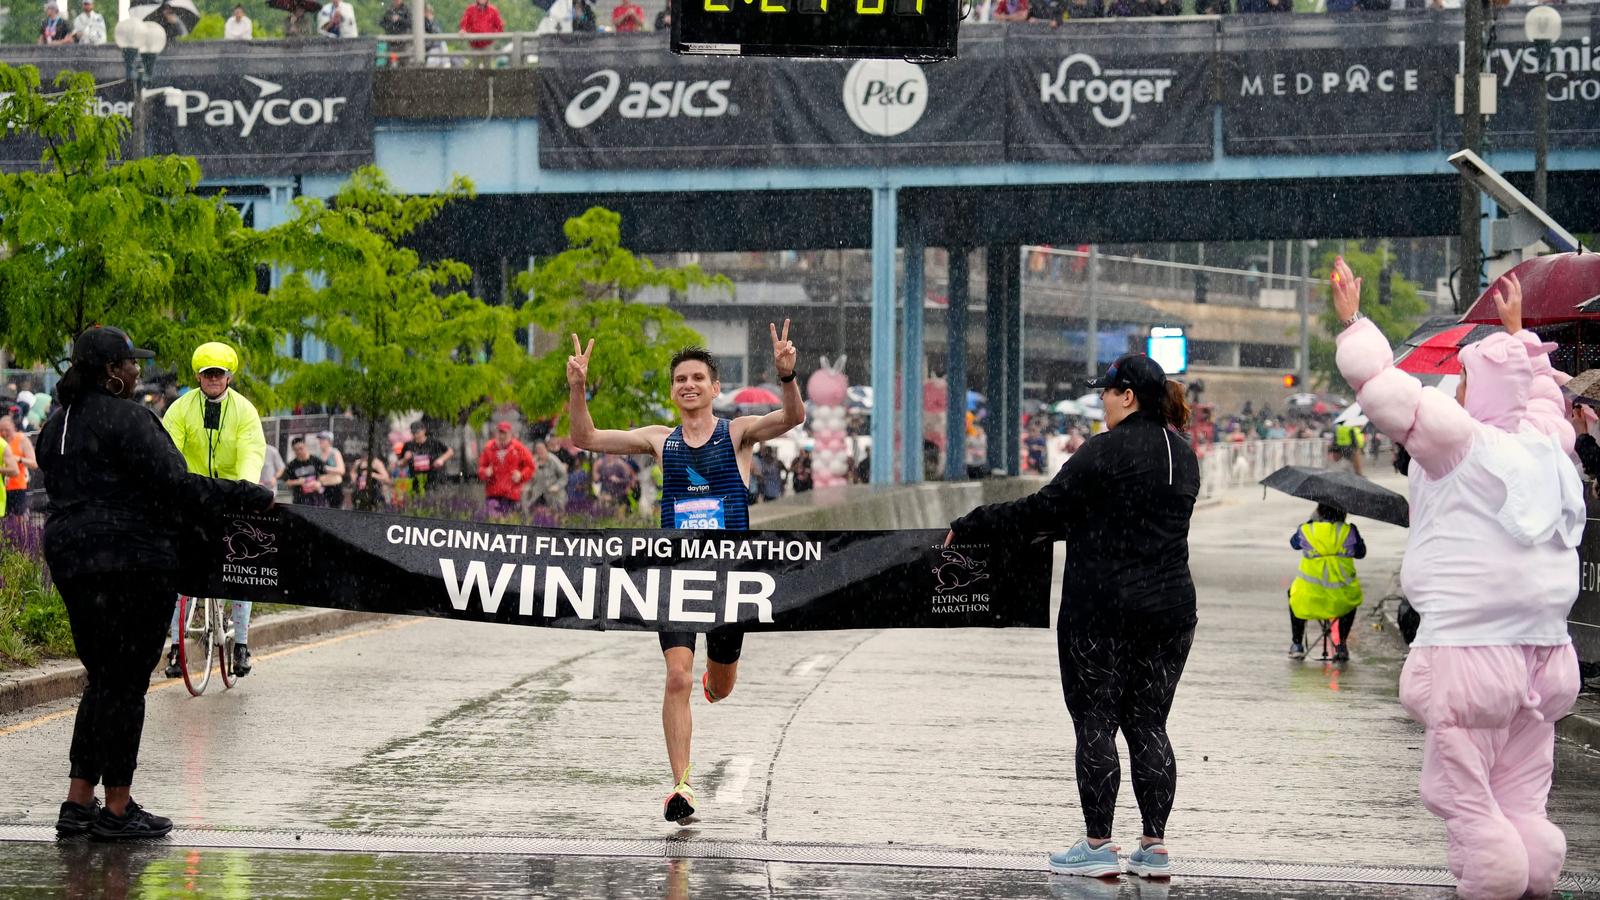 The Flying Pig Marathon champion is from Tipp City